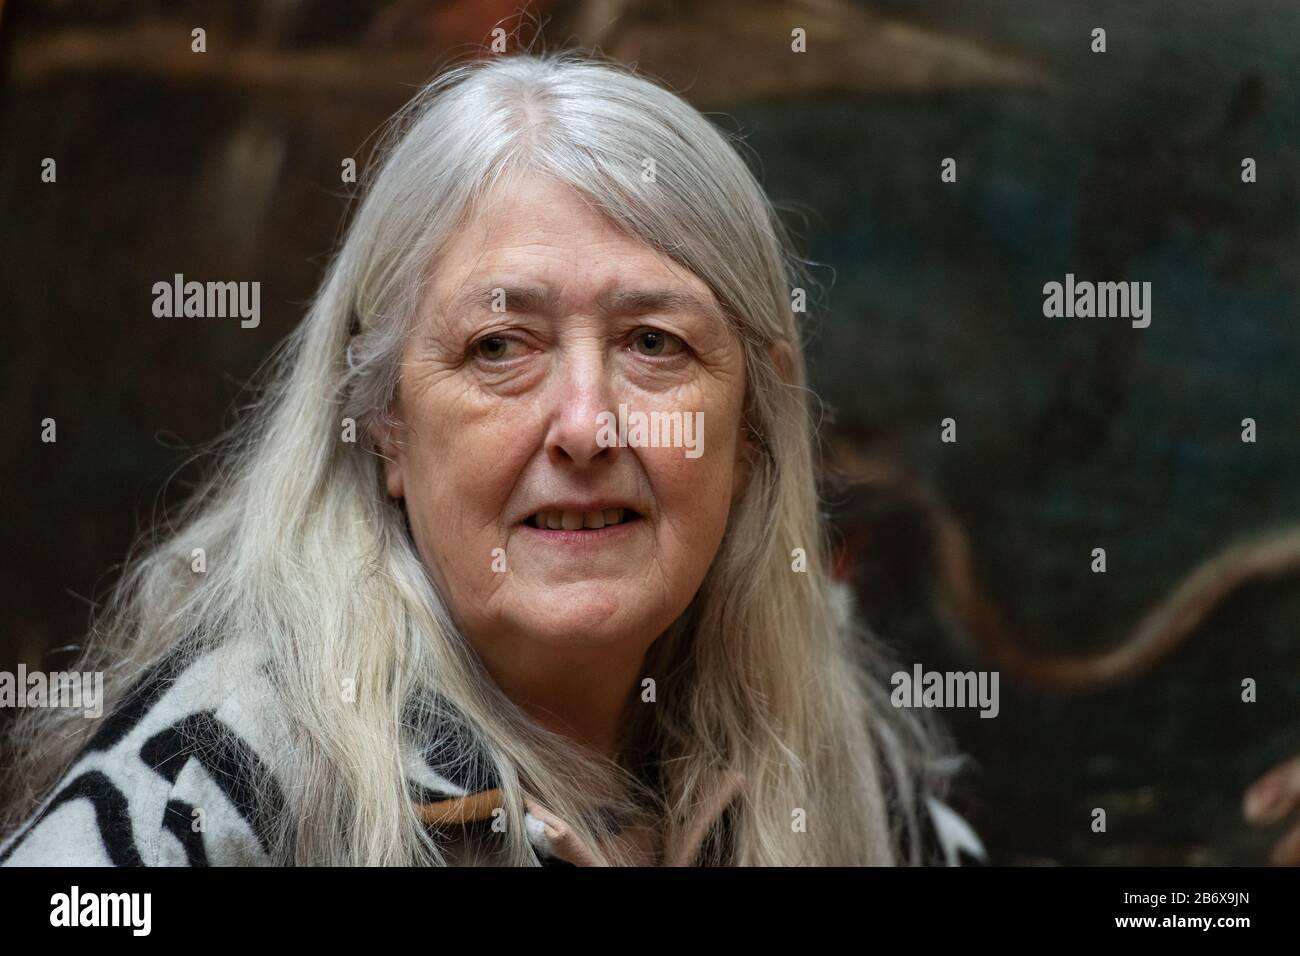 Historian Mary Beard at a press view of Titian's Poesie series of large scale Greek mythological paintings, part of the 'Titian: Love, Desire, Death' exhibition, at the National Gallery, London. The exhibition brings the series of six paintings together in their entirety for the first time since the late 16th century. Stock Photo